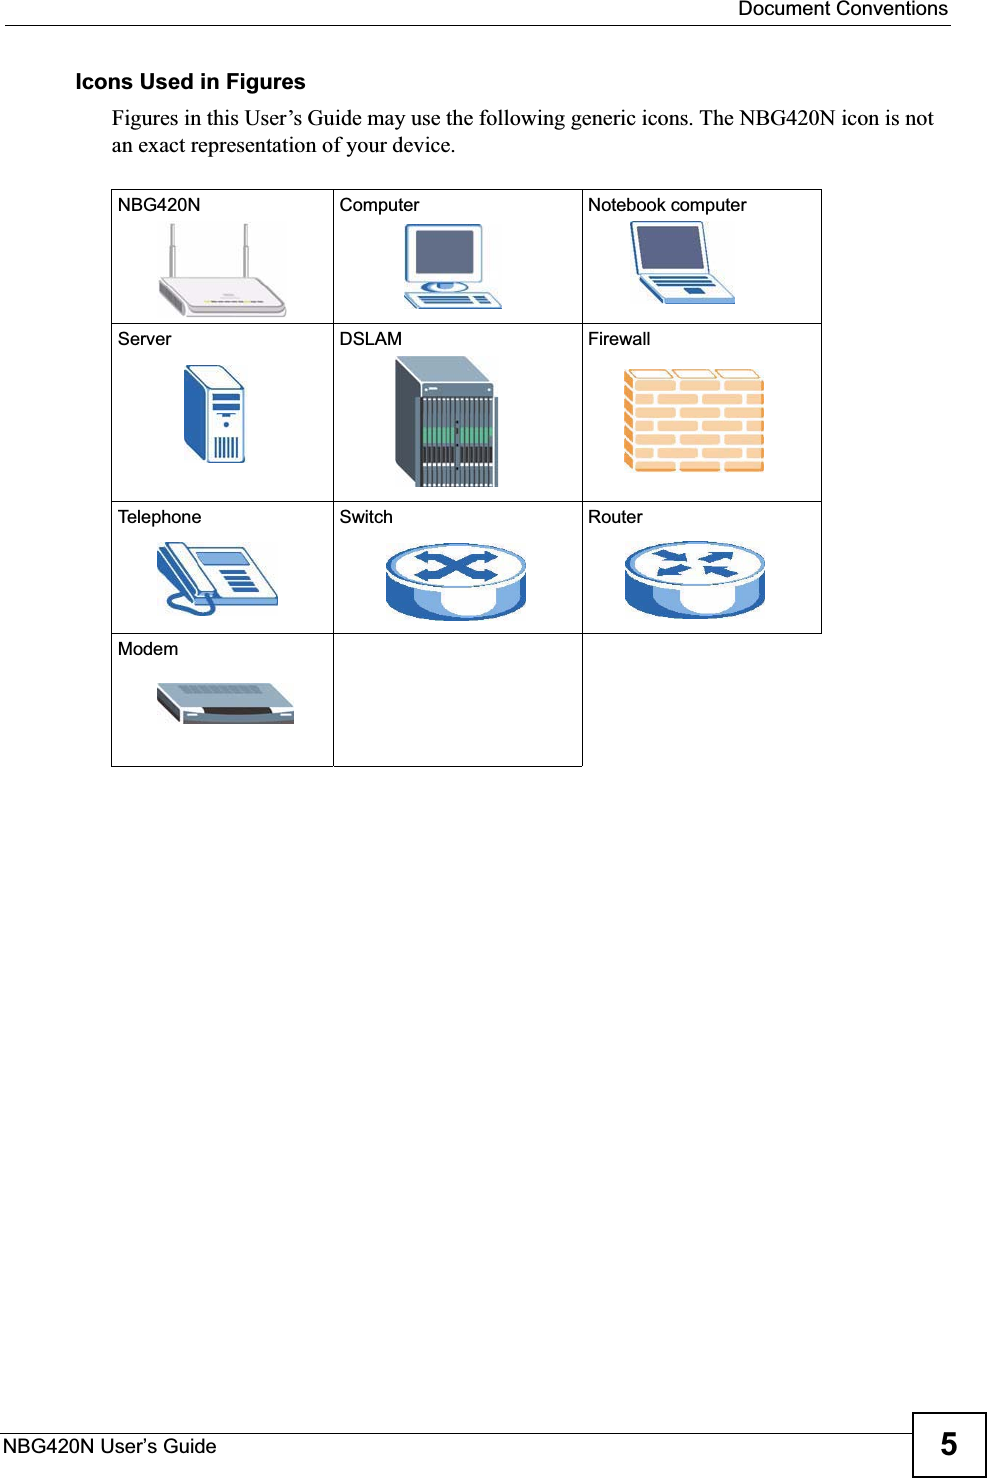  Document ConventionsNBG420N User’s Guide 5Icons Used in FiguresFigures in this User’s Guide may use the following generic icons. The NBG420N icon is not an exact representation of your device.NBG420N Computer Notebook computerServer DSLAM FirewallTelephone Switch RouterModem